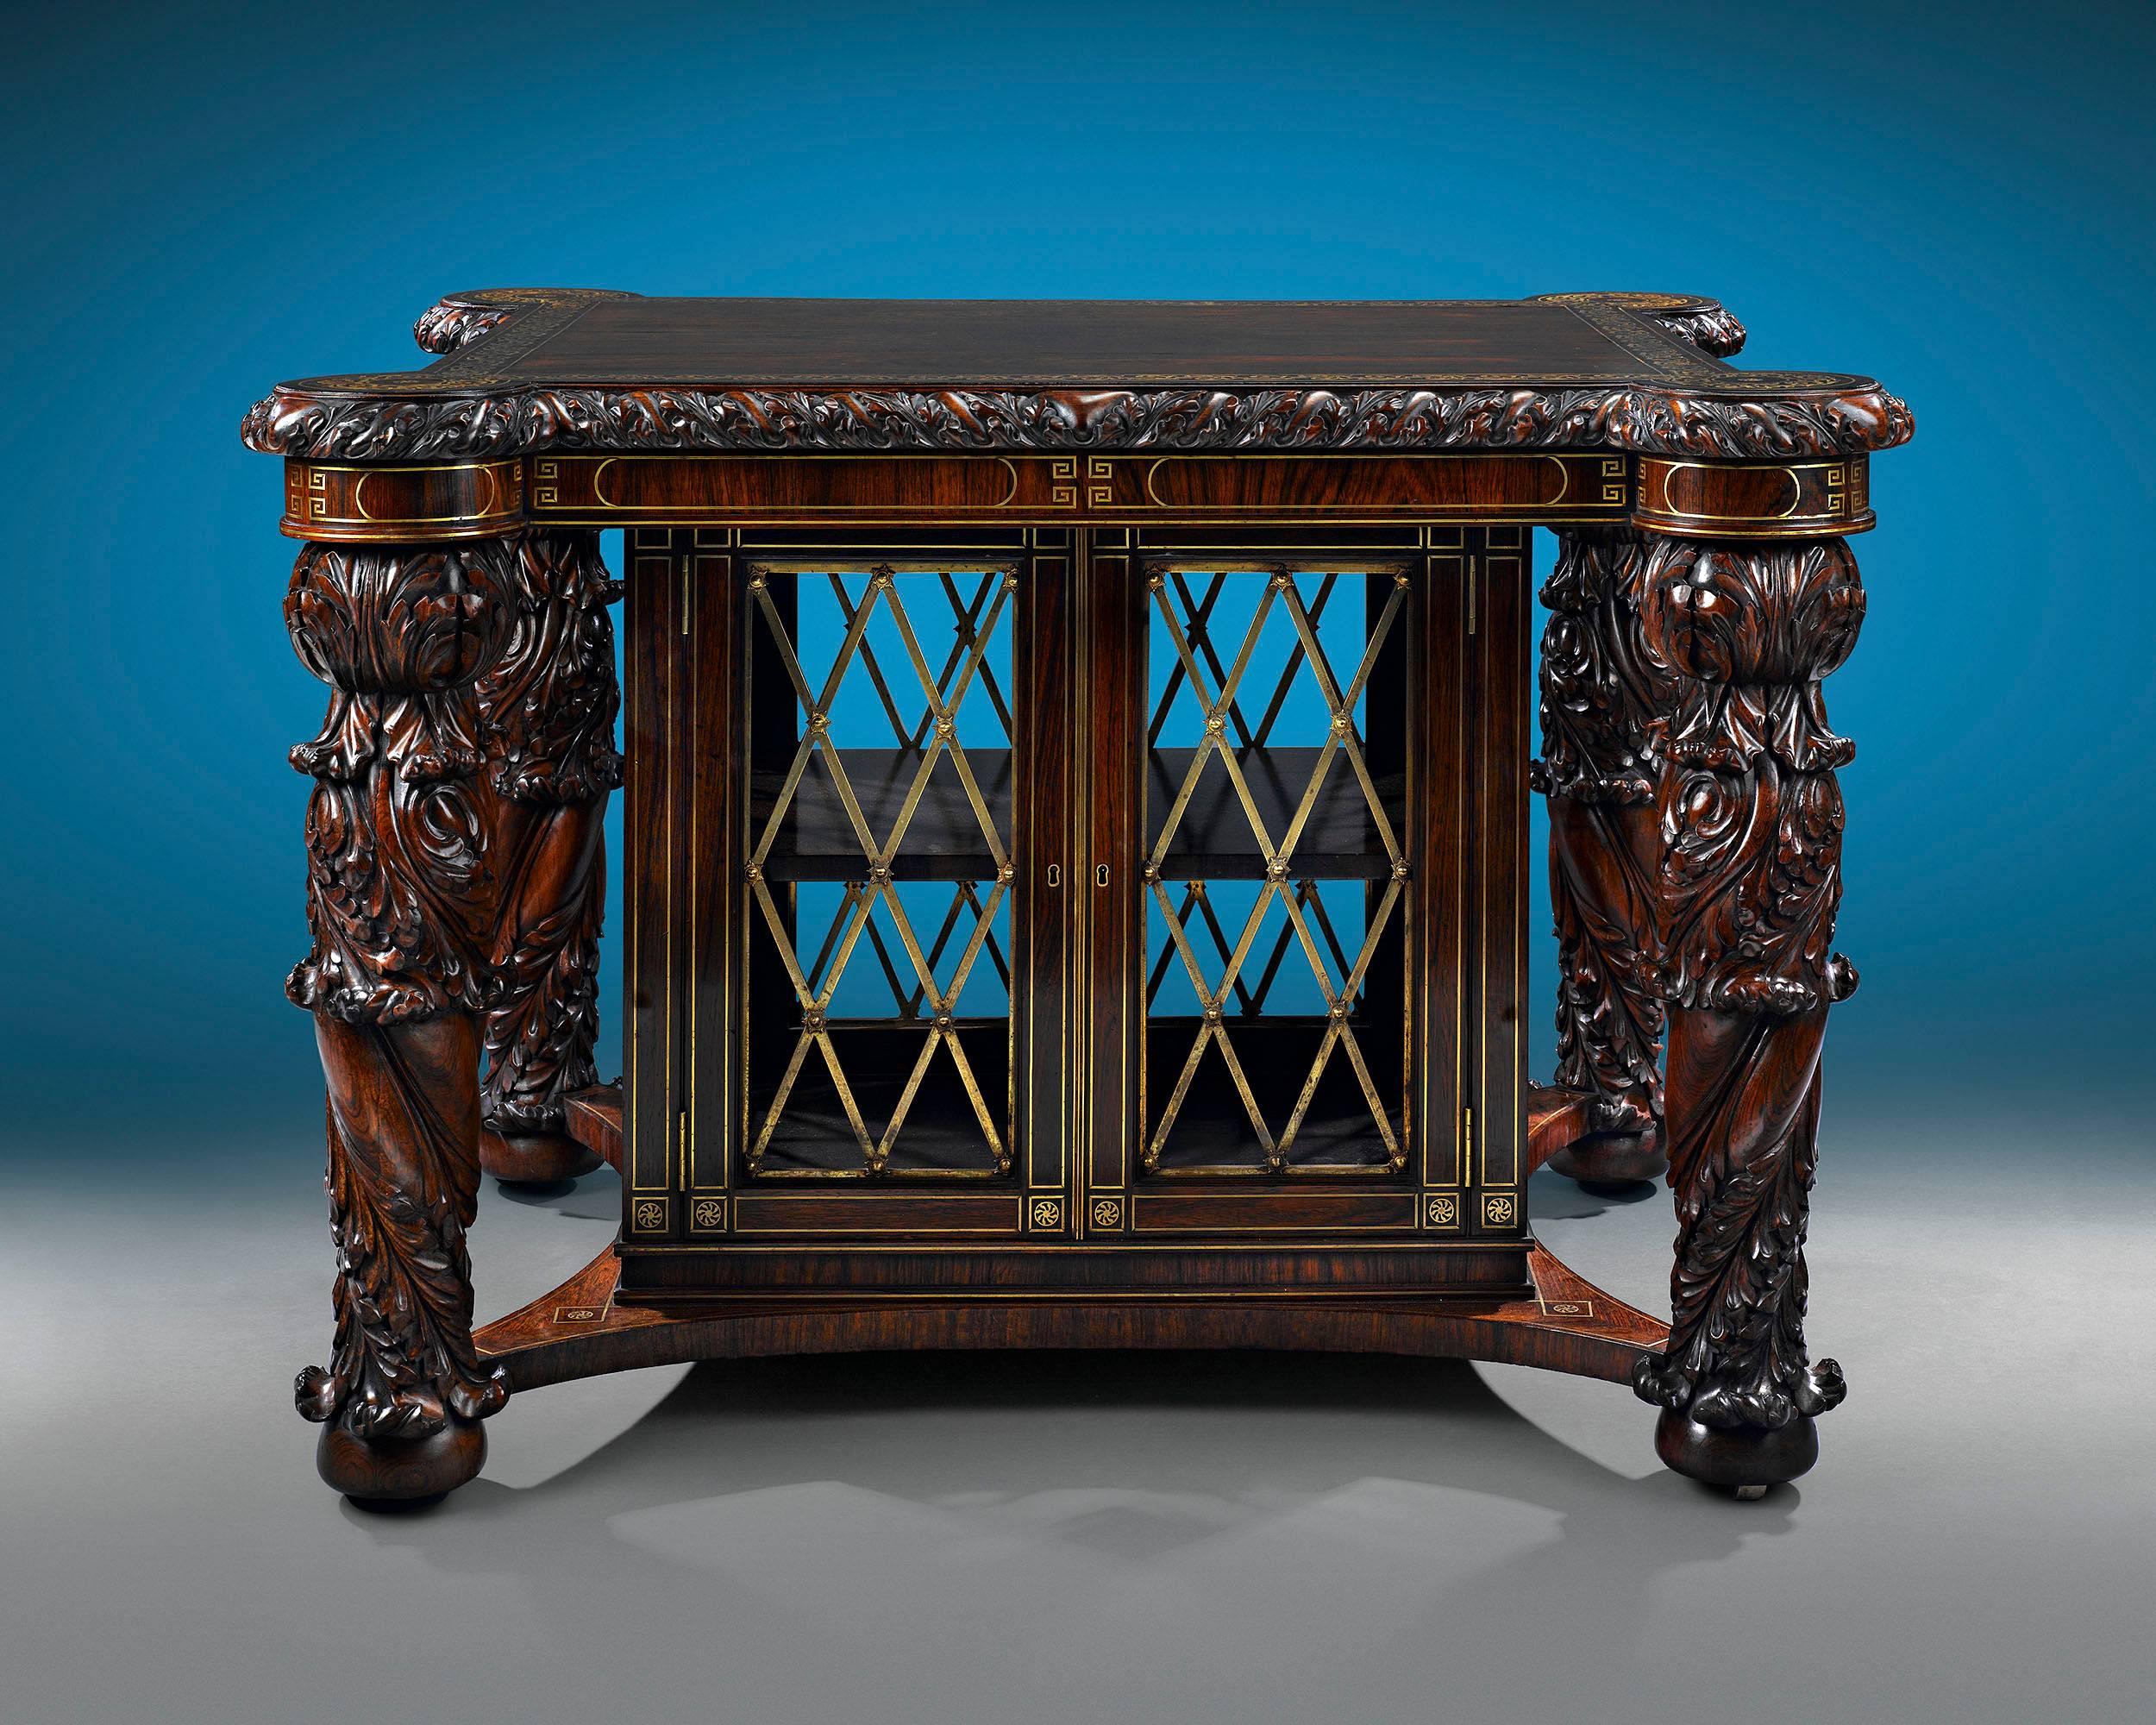 This rare and exquisite English library folio cabinet, almost certainly crafted by famed cabinetmaker George Bullock, is a tour-de-force of Regency-period design. Crafted of sumptuous rosewood, this impeccable table features beautifully carved